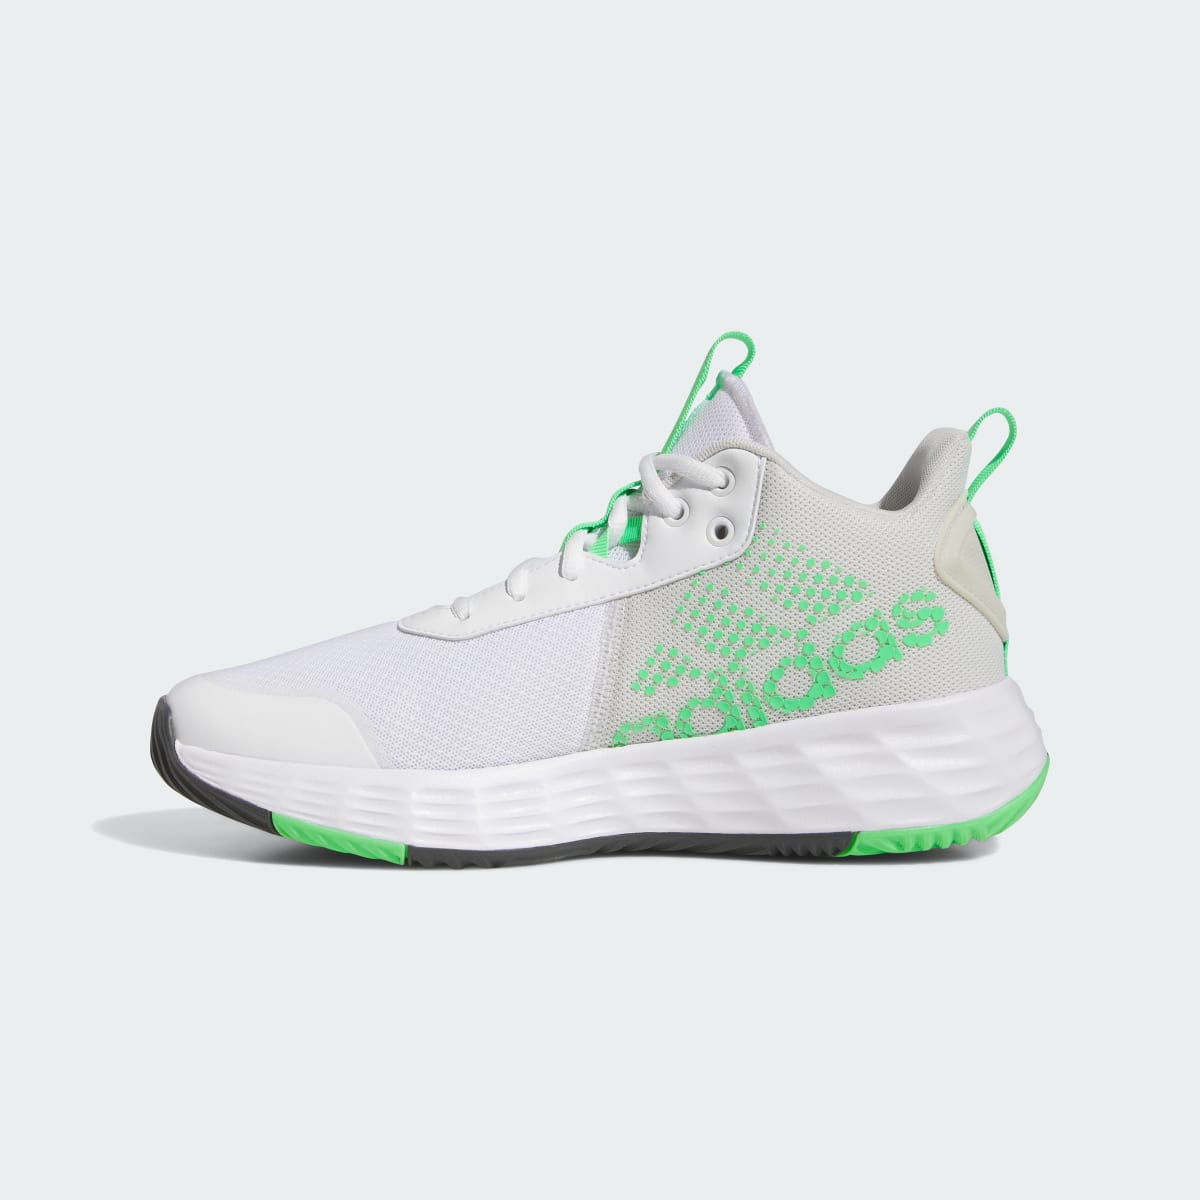 Adidas Ownthegame Shoes. 7